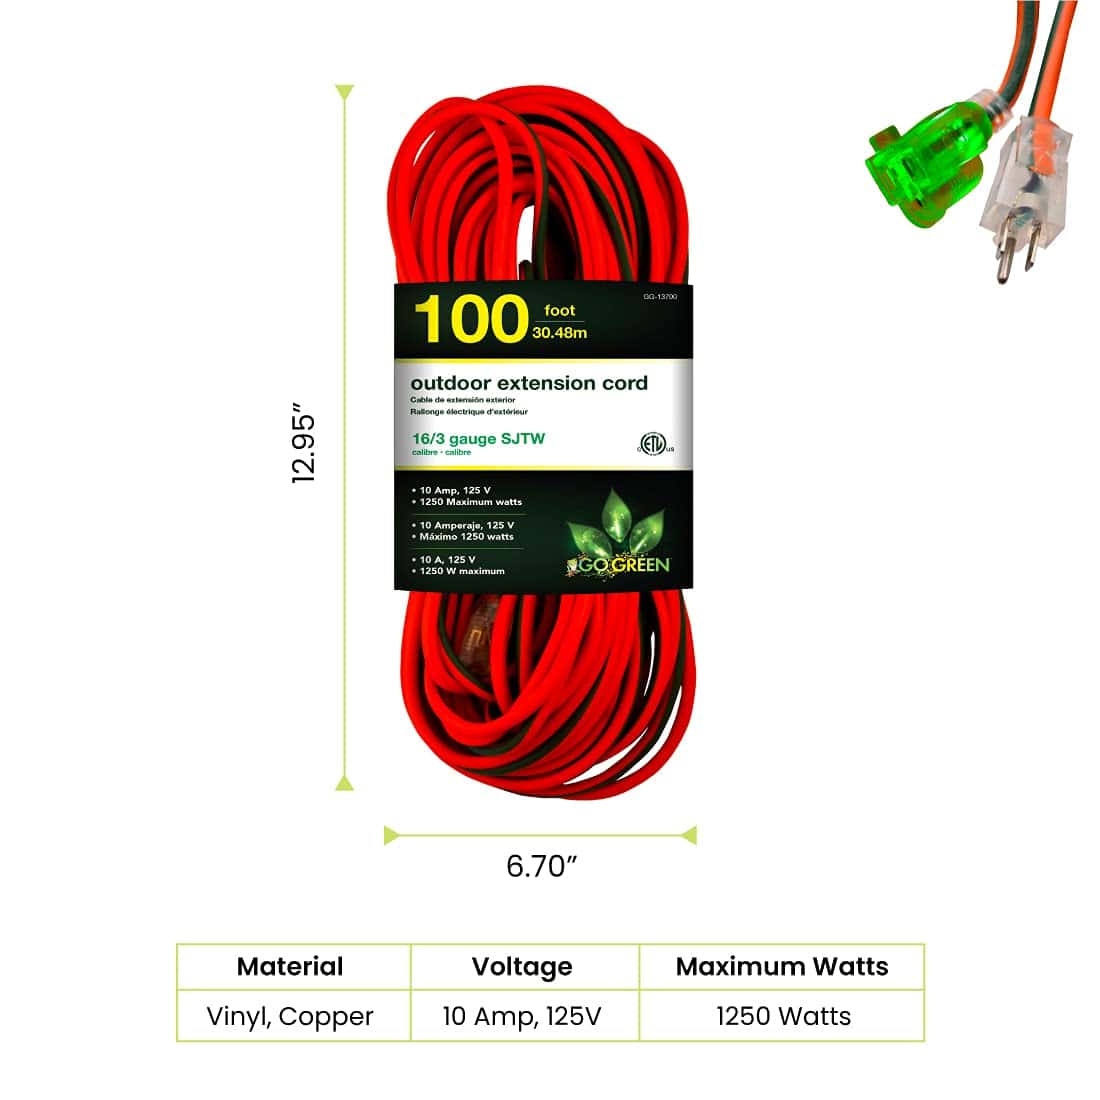 Go-Green-Power-Inc.-GG-13700-16-3-SJTW-Outdoor-Extension-Cord-Lighted-End-100-ft